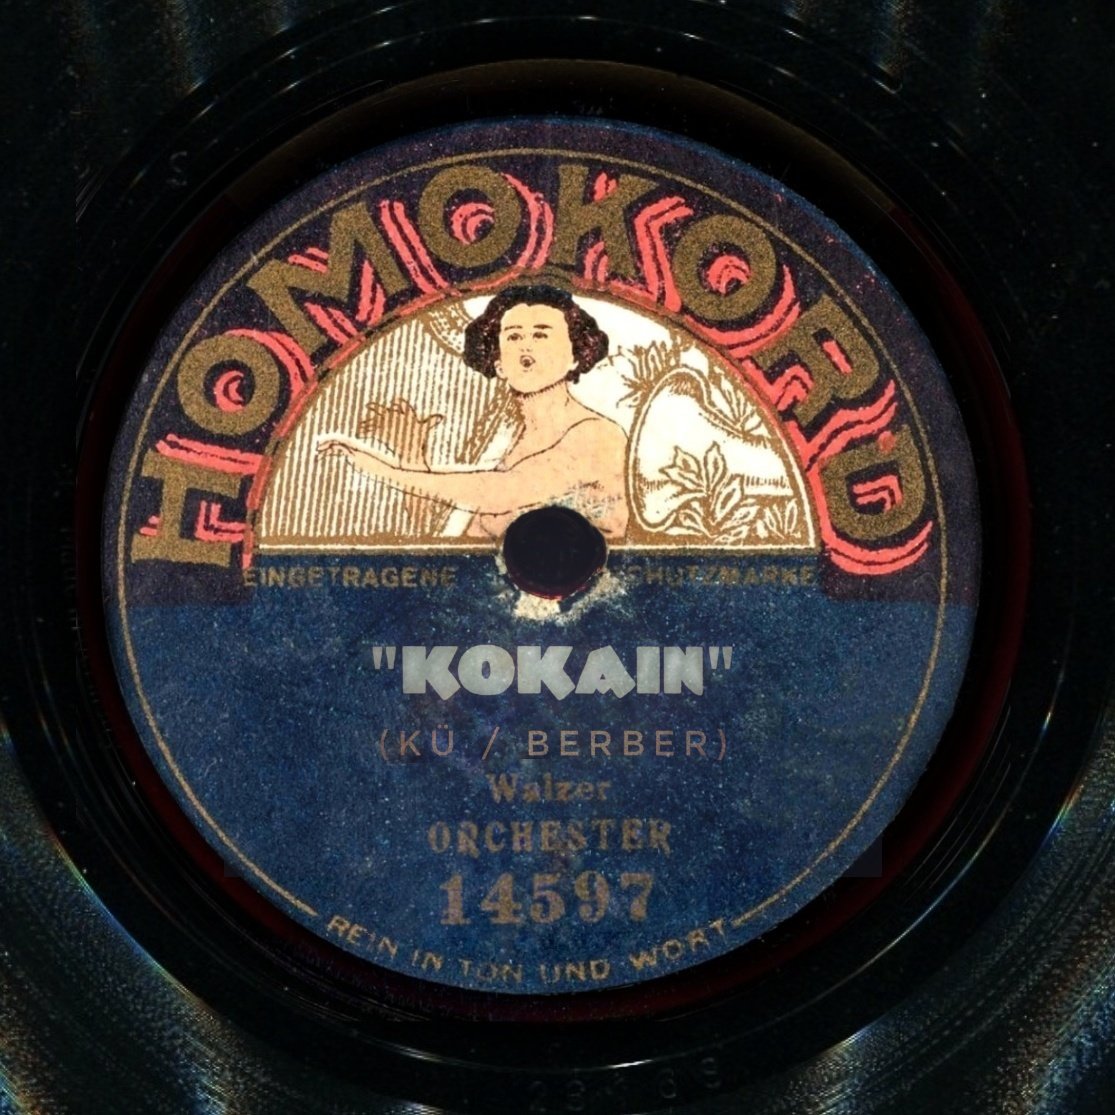 In 1922, Herman Eisner's Homokord company turned me down, so it was a great feeling when, 6 years later, the great man himself asked me to record for him. The label still looks amazing!
#bandcamp #bandcampmusic #78s #homokord #gramophone #phonogram #shellac #jazzage #berlin